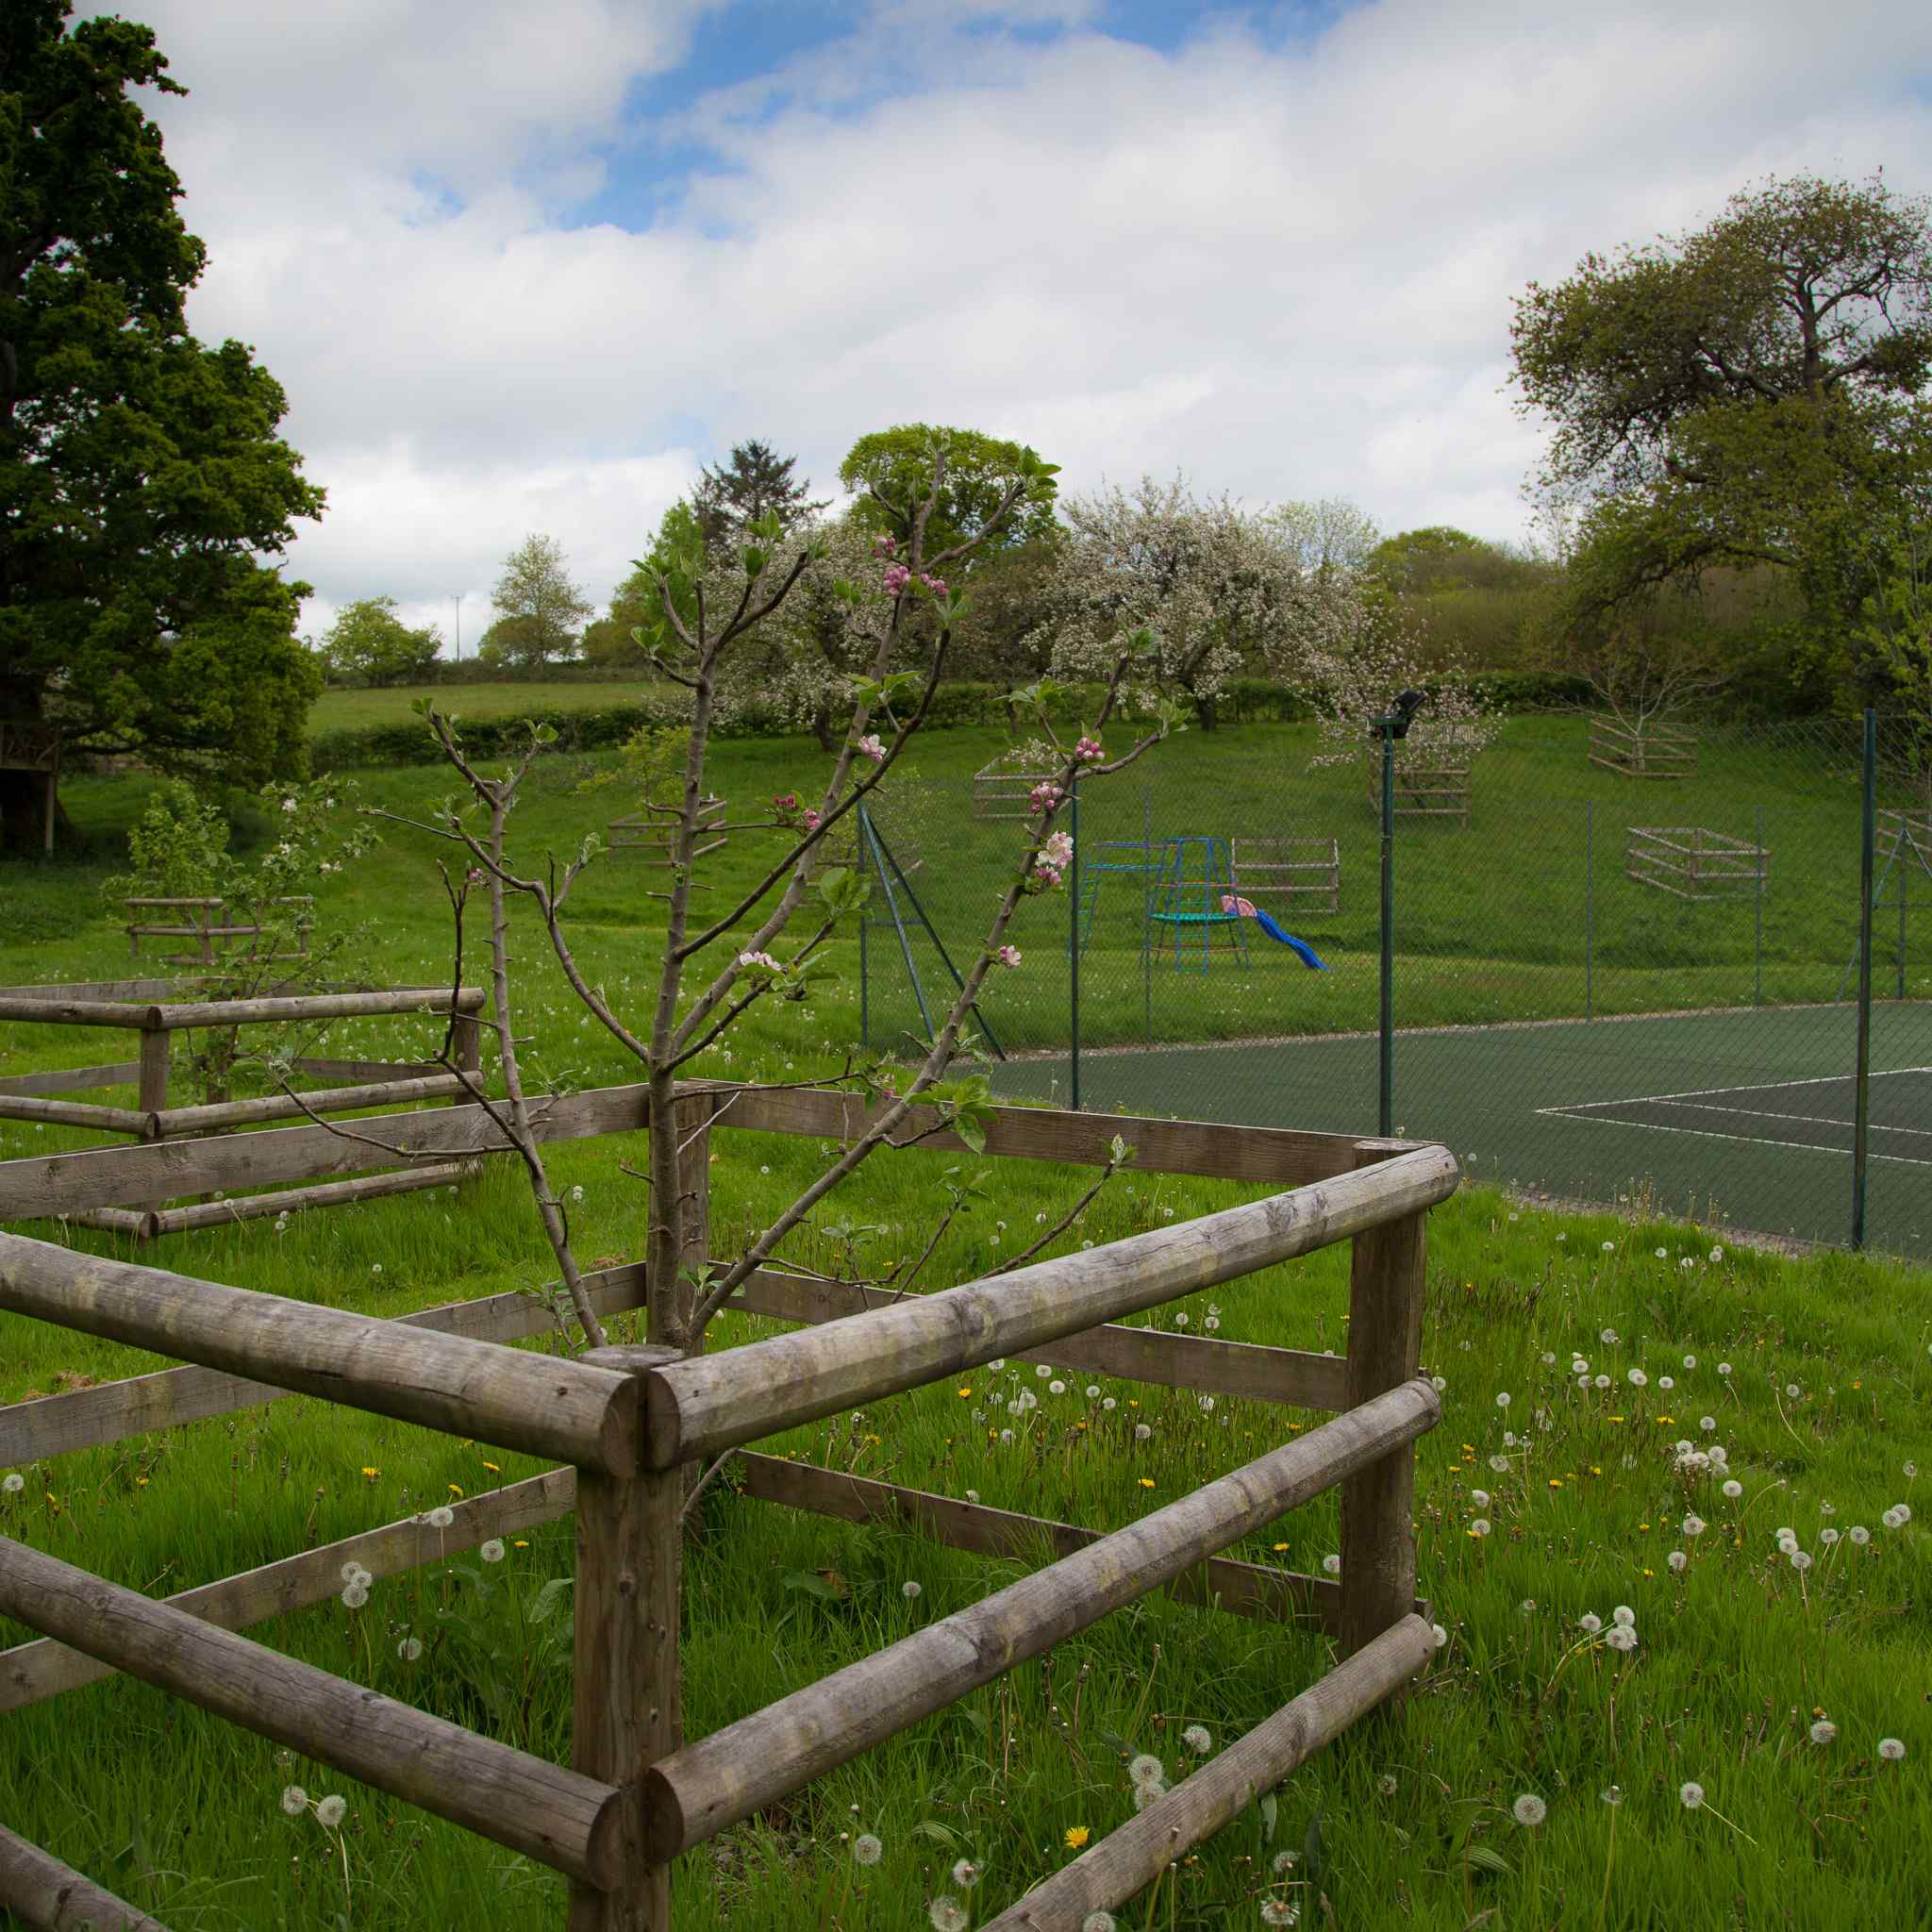 Orchard overlooking the Tennis Court